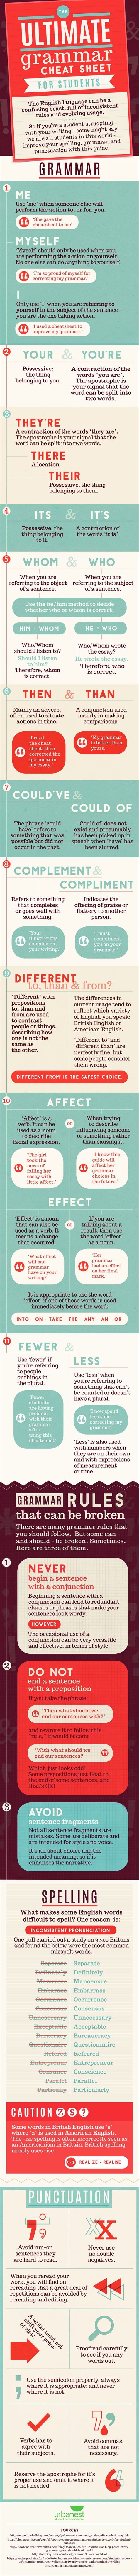 Educational Infographic Infographic The Ultimate English Grammar